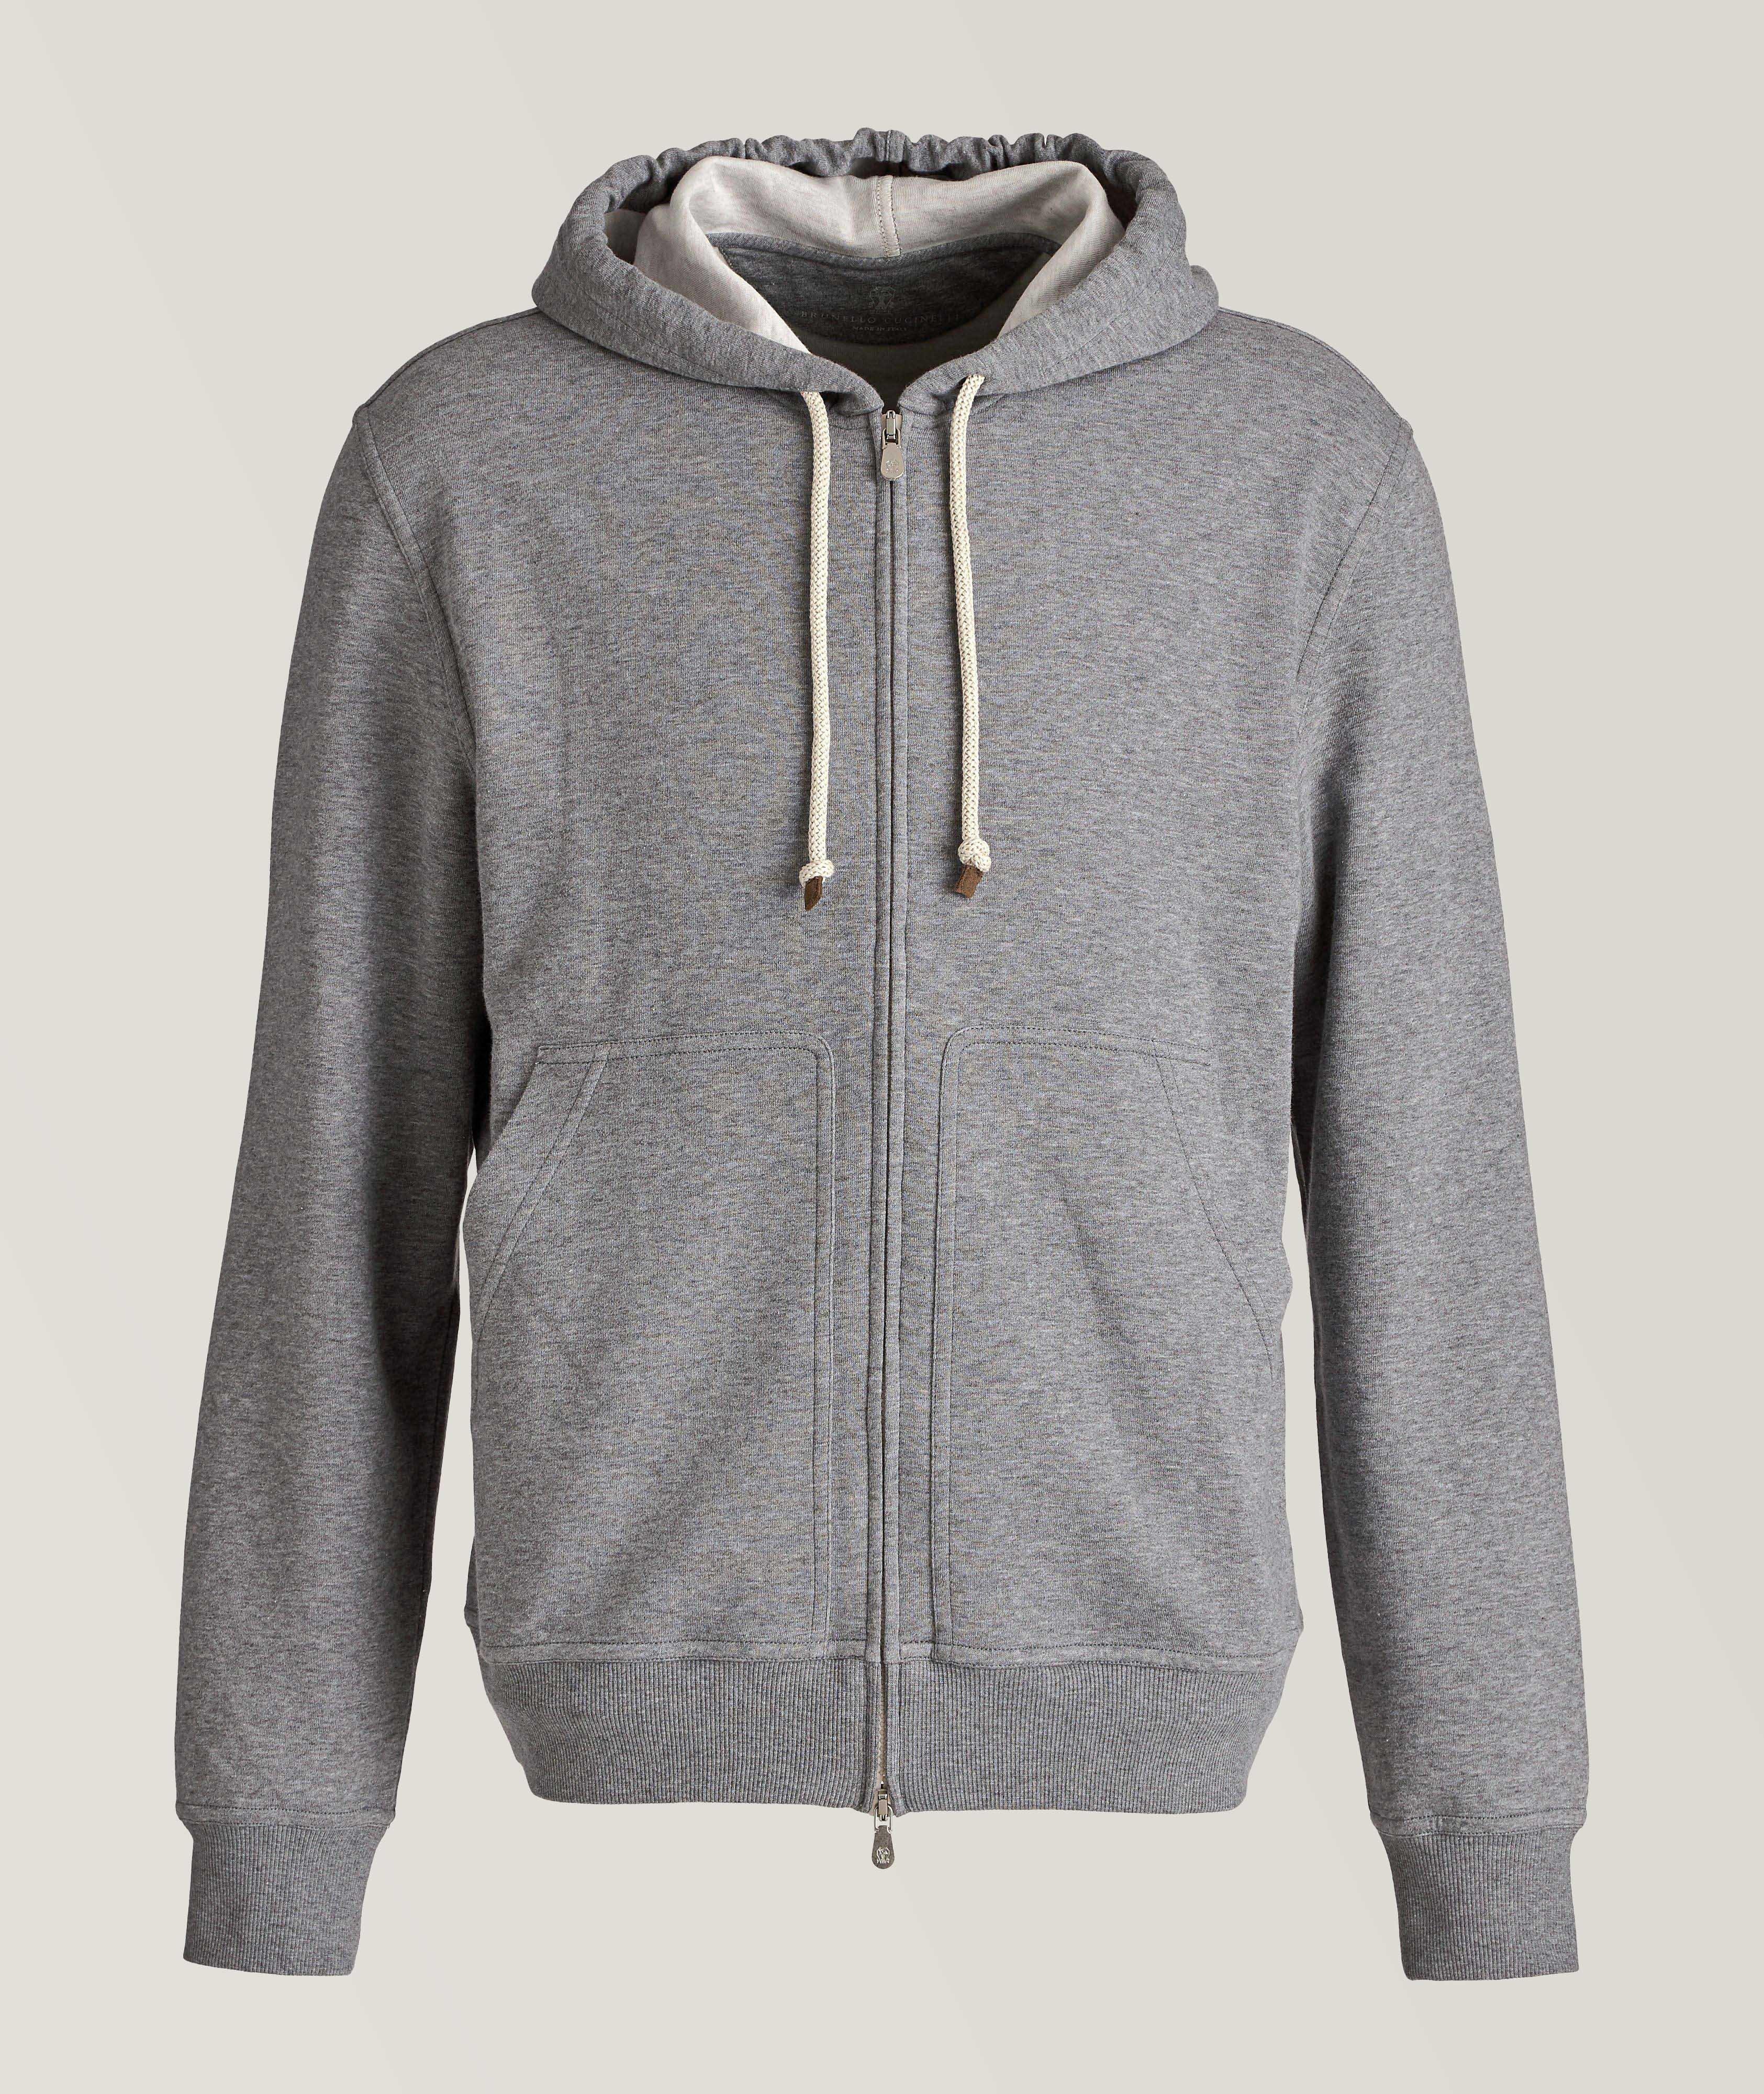 Zip-Up Hooded Sweater image 0